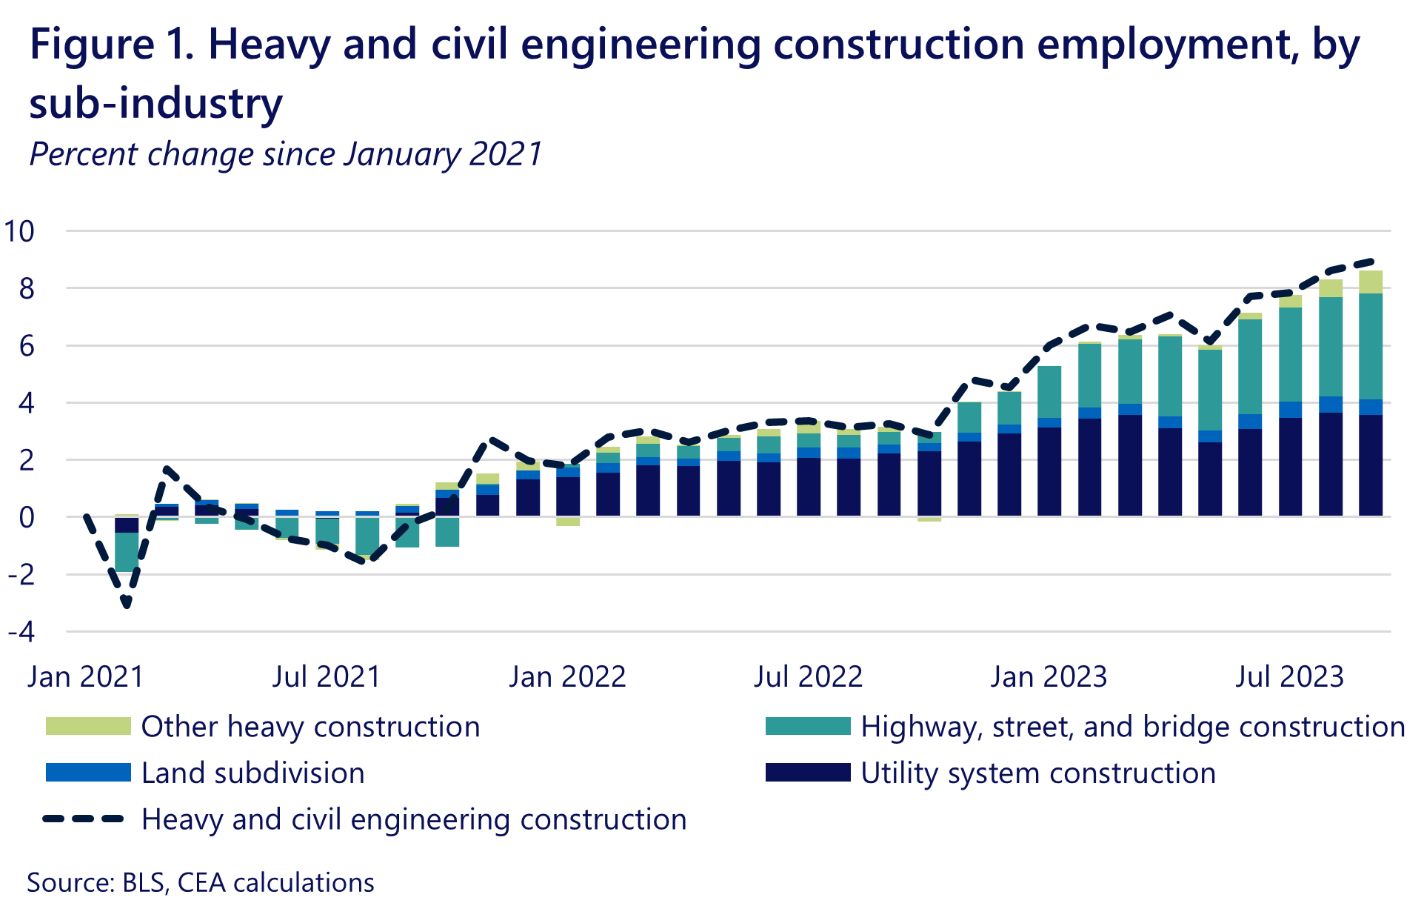 Graph shows gains in heavy and civil construction employment from January 2021 to July 2023, with the biggest gains in highway, street, bridge and utility construction.